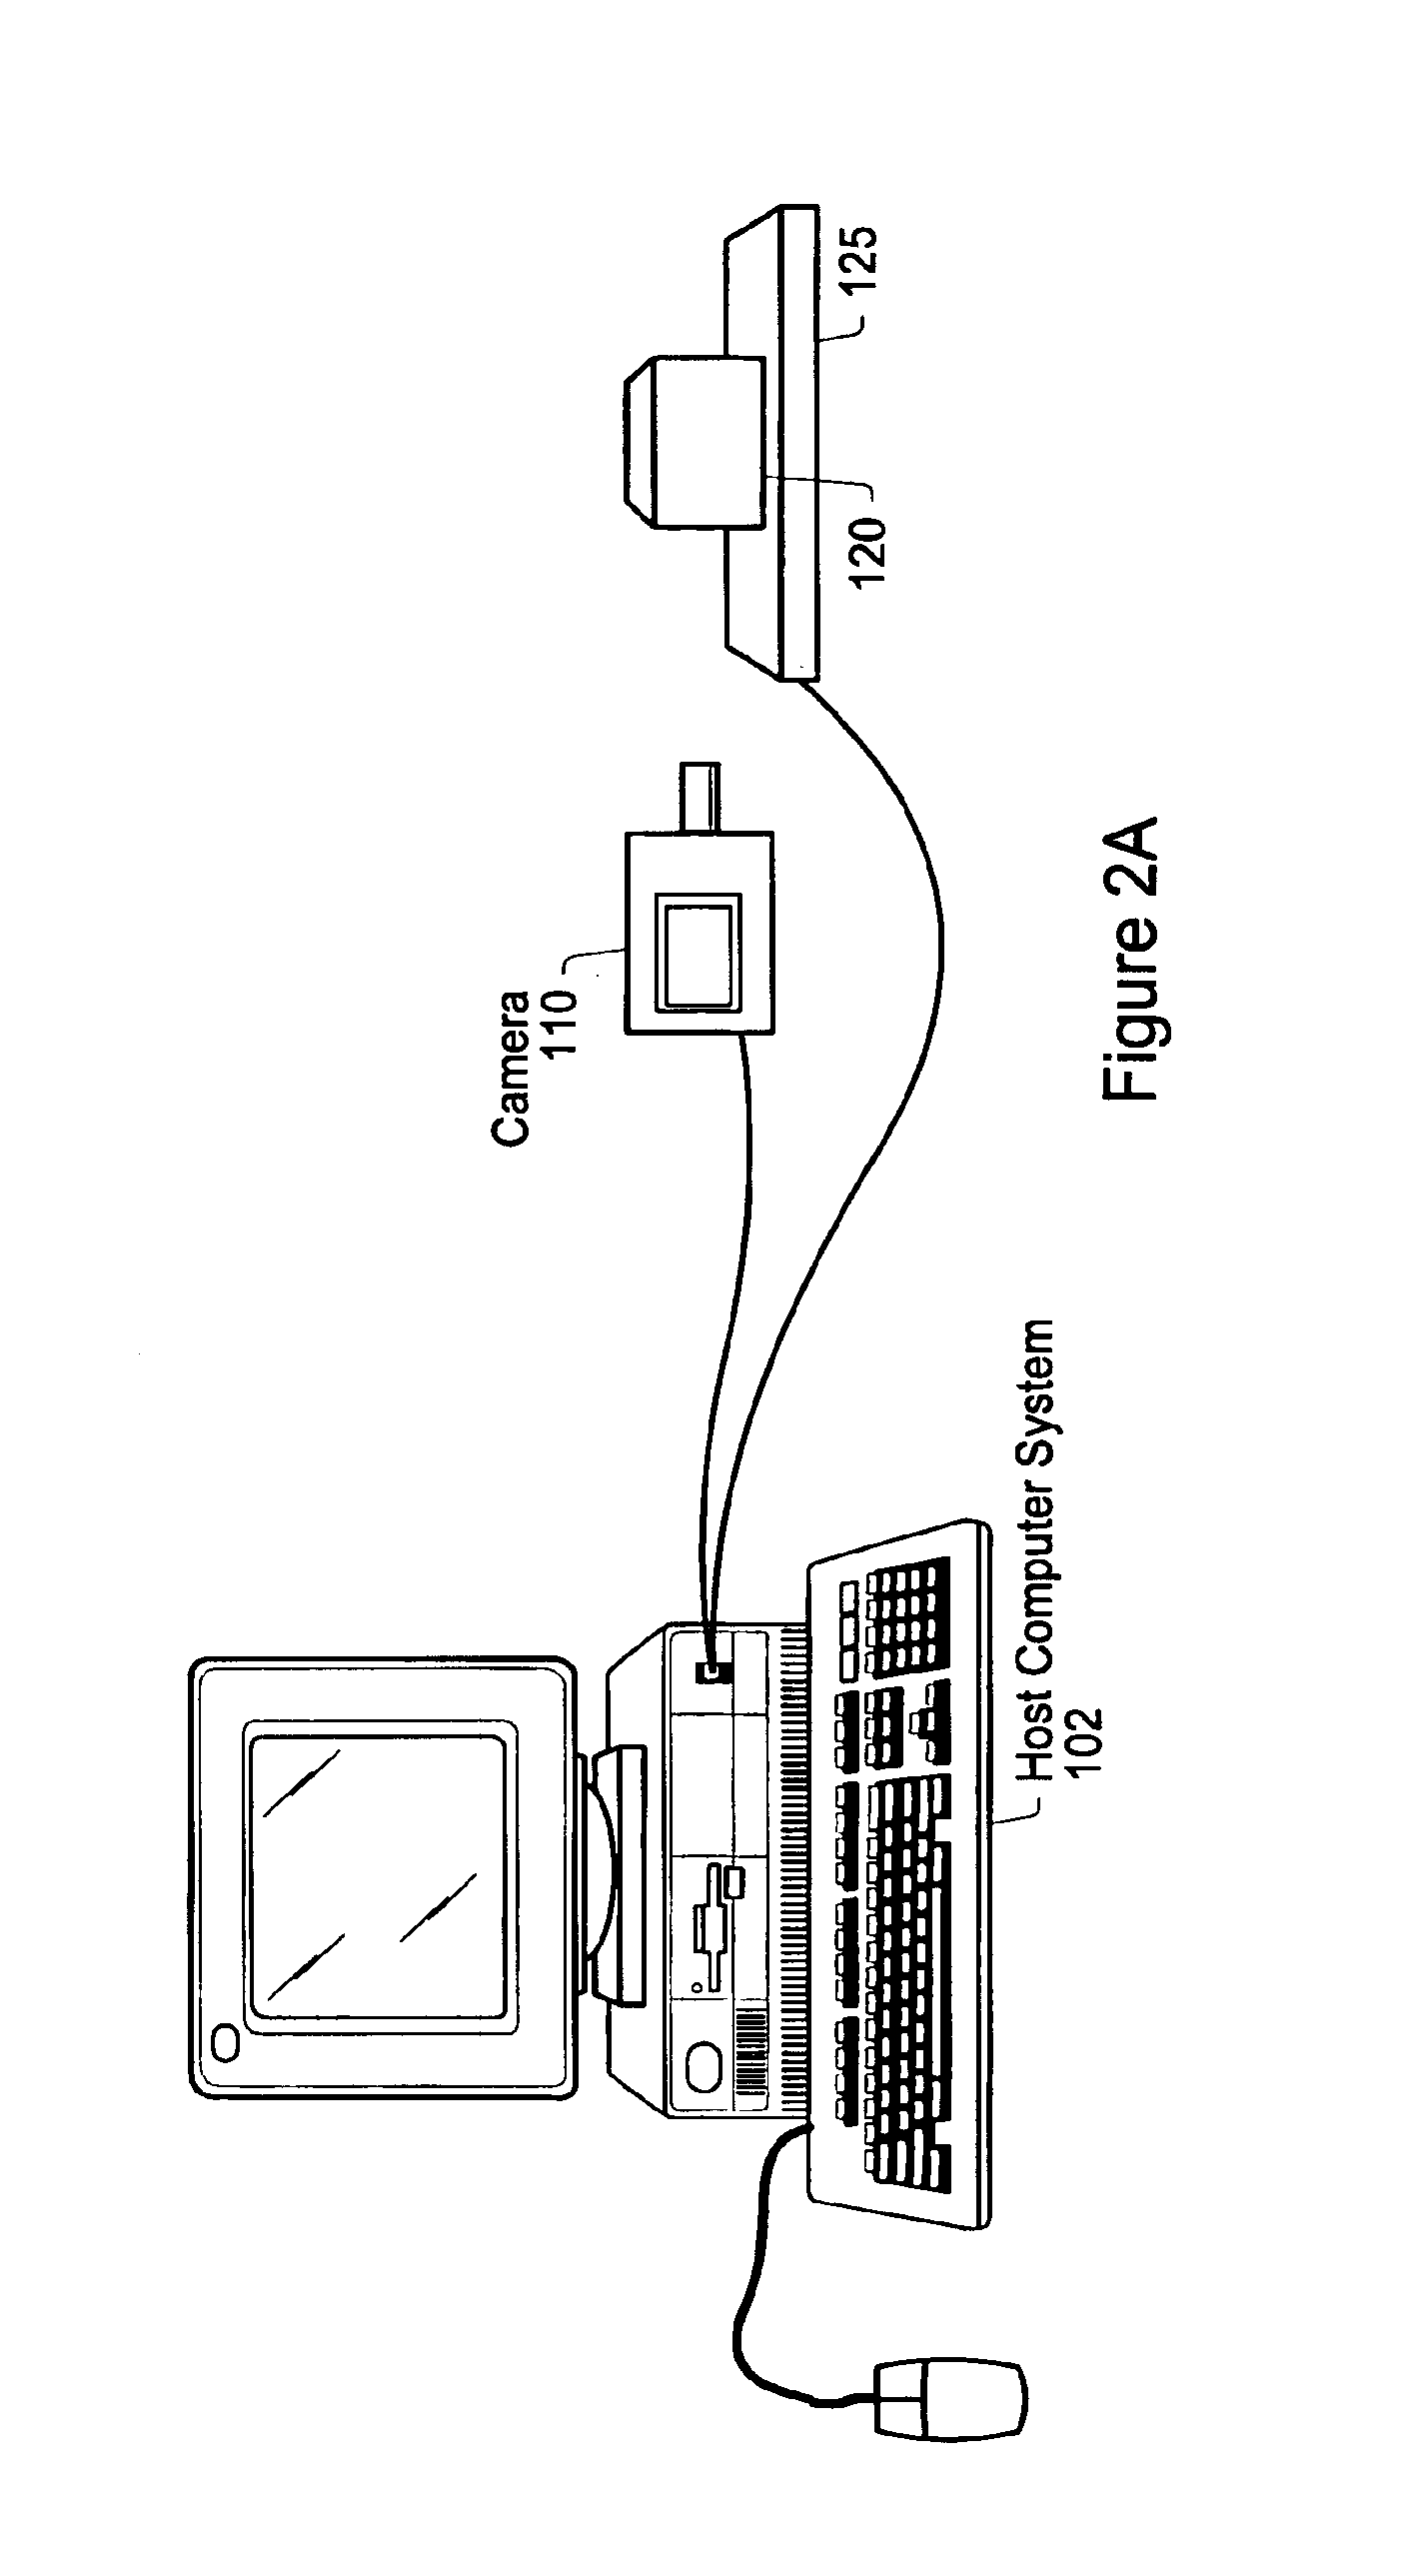 System and method for scanning a region using a low discrepancy sequence